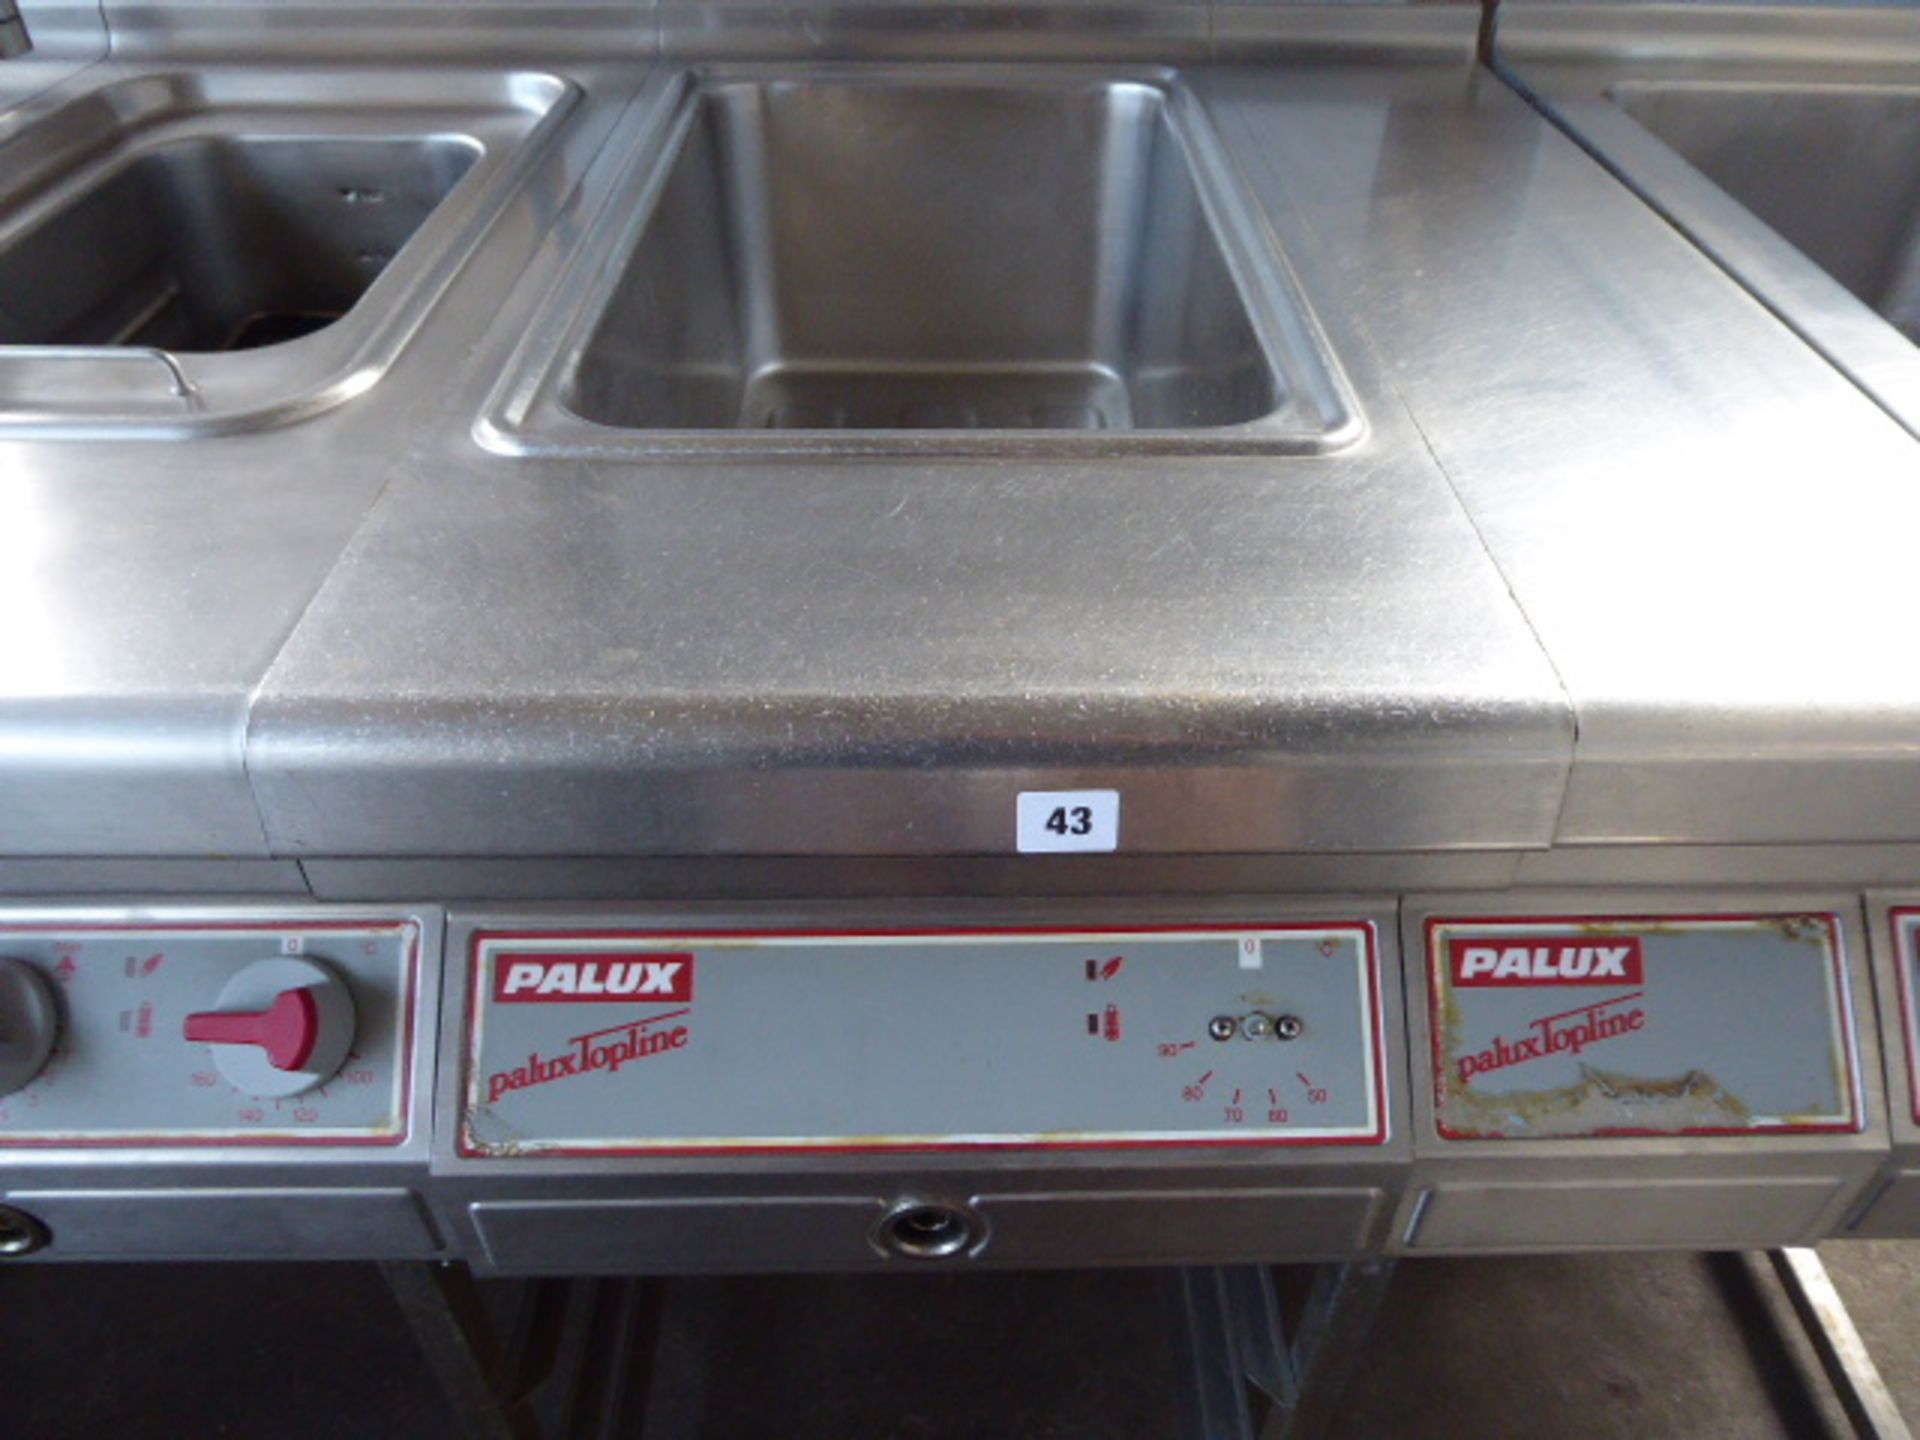 40cm electric Palux Topline bench top single way bain marie with ambient table top